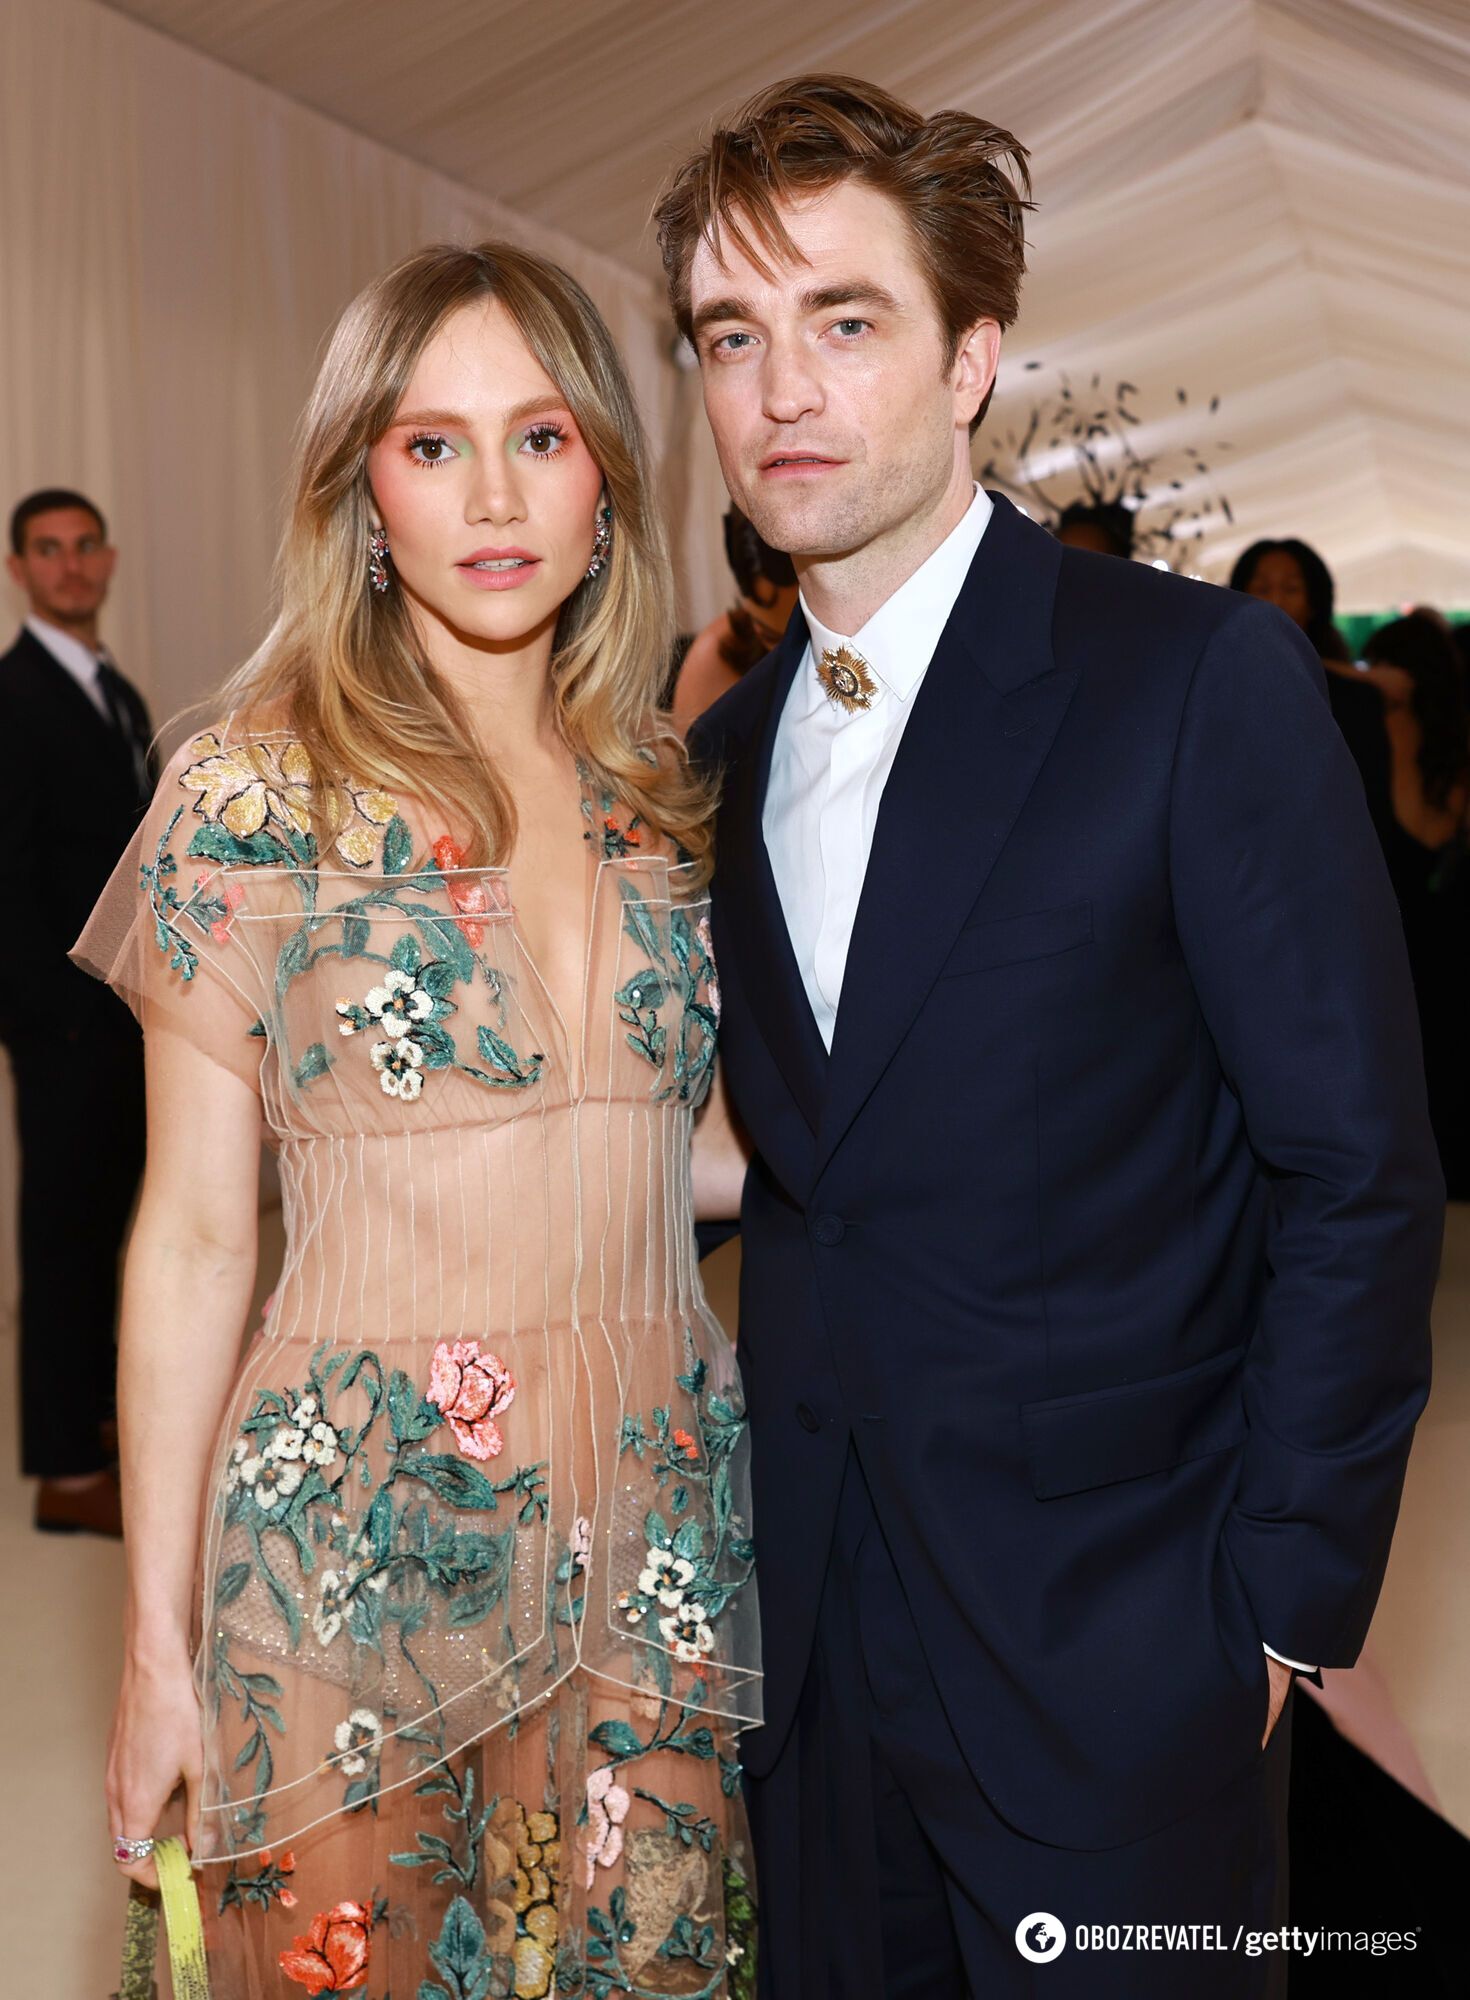 Twilight star Robert Pattinson became a father for the first time: what his wife looks like